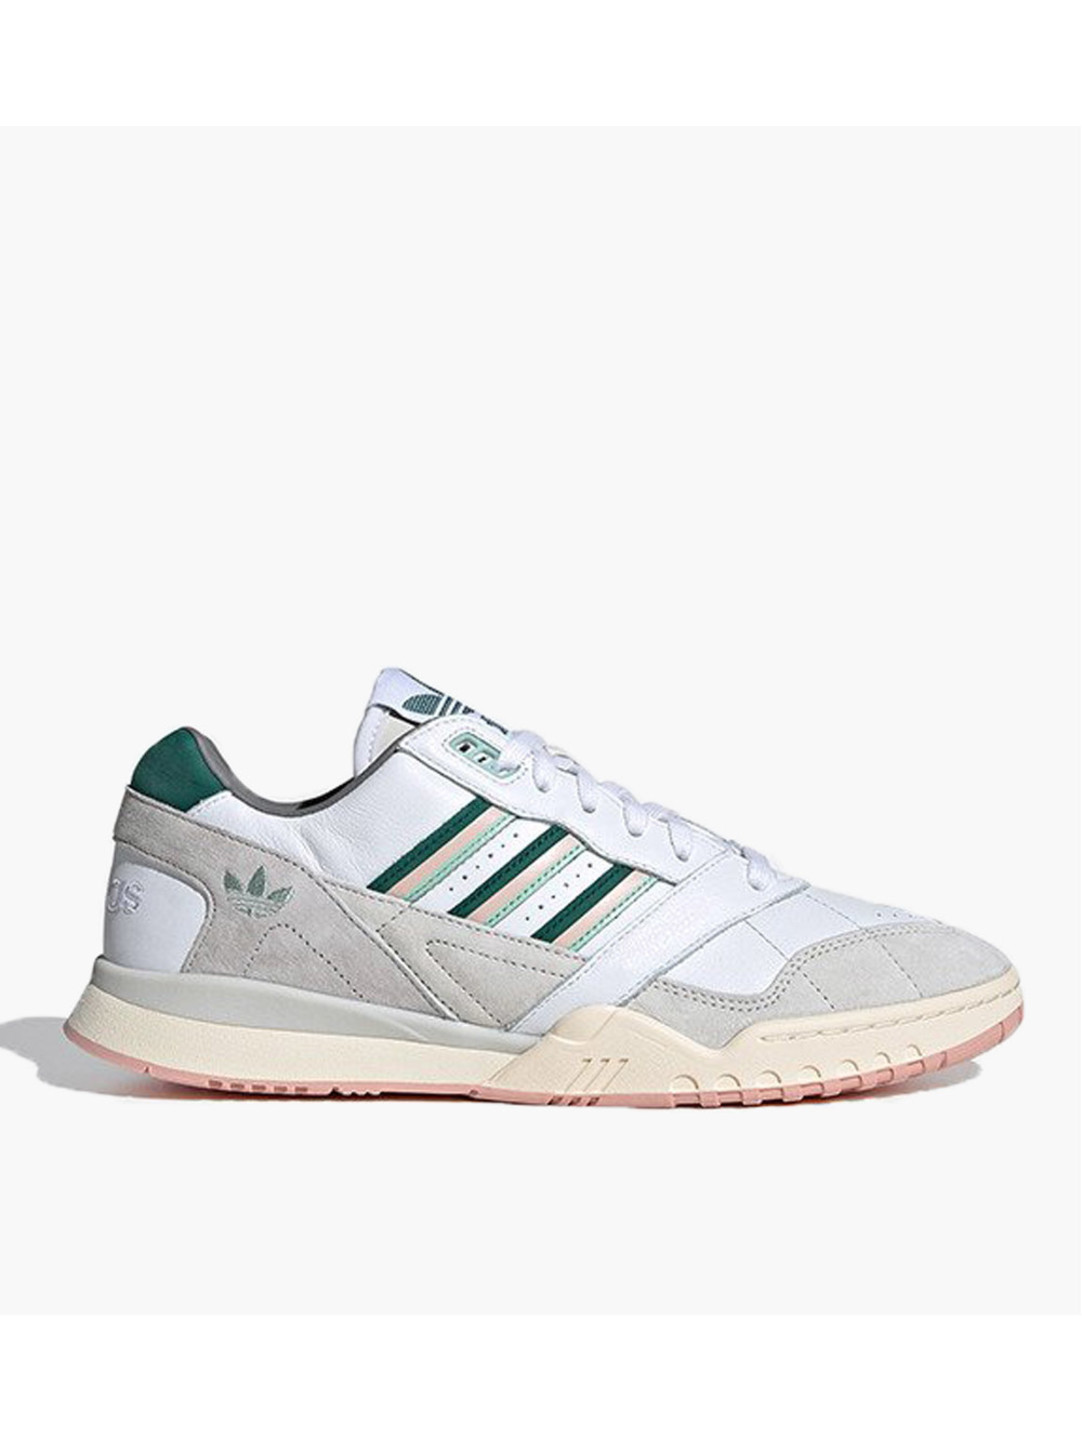 white pink and green adidas